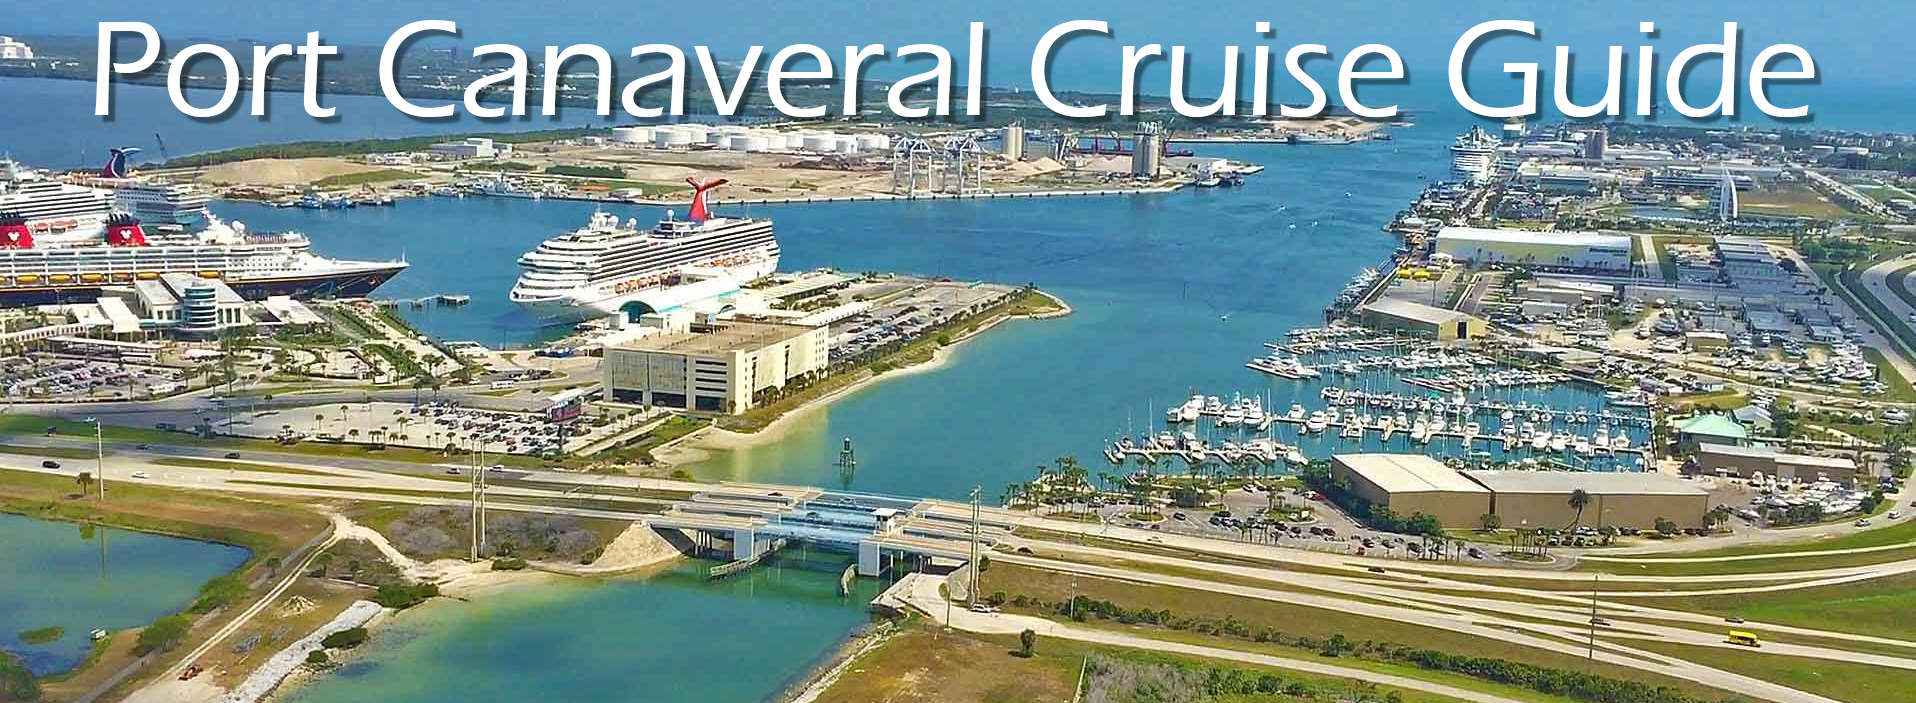 Port Canaveral Cruise Guide Let's See America